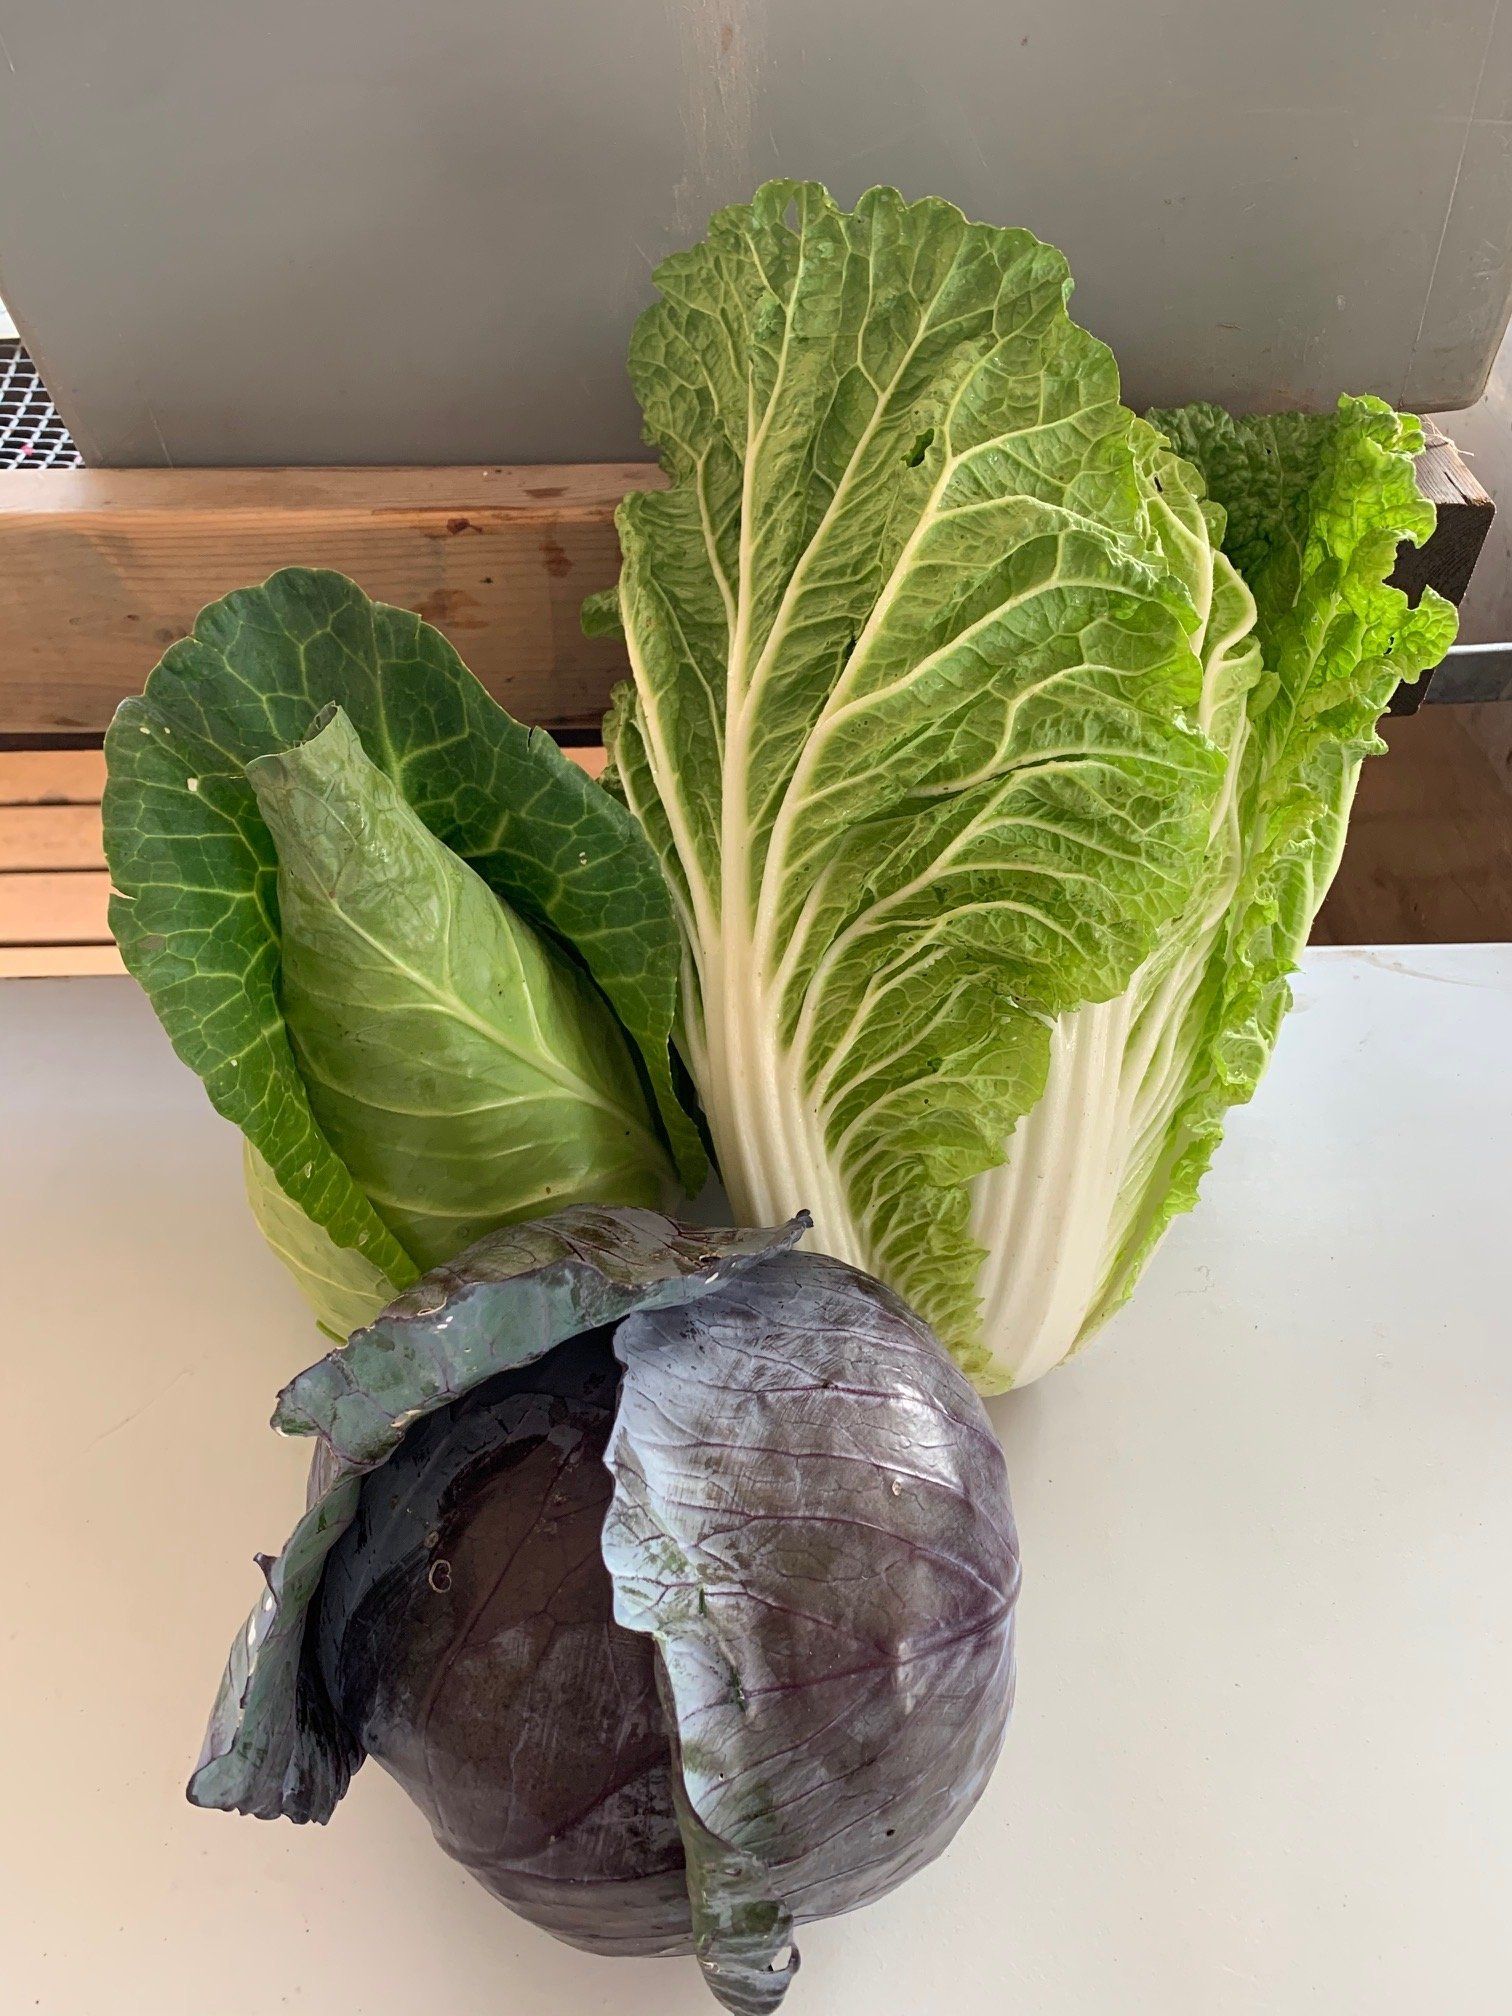 Next Happening: What can we do with all this cabbage?